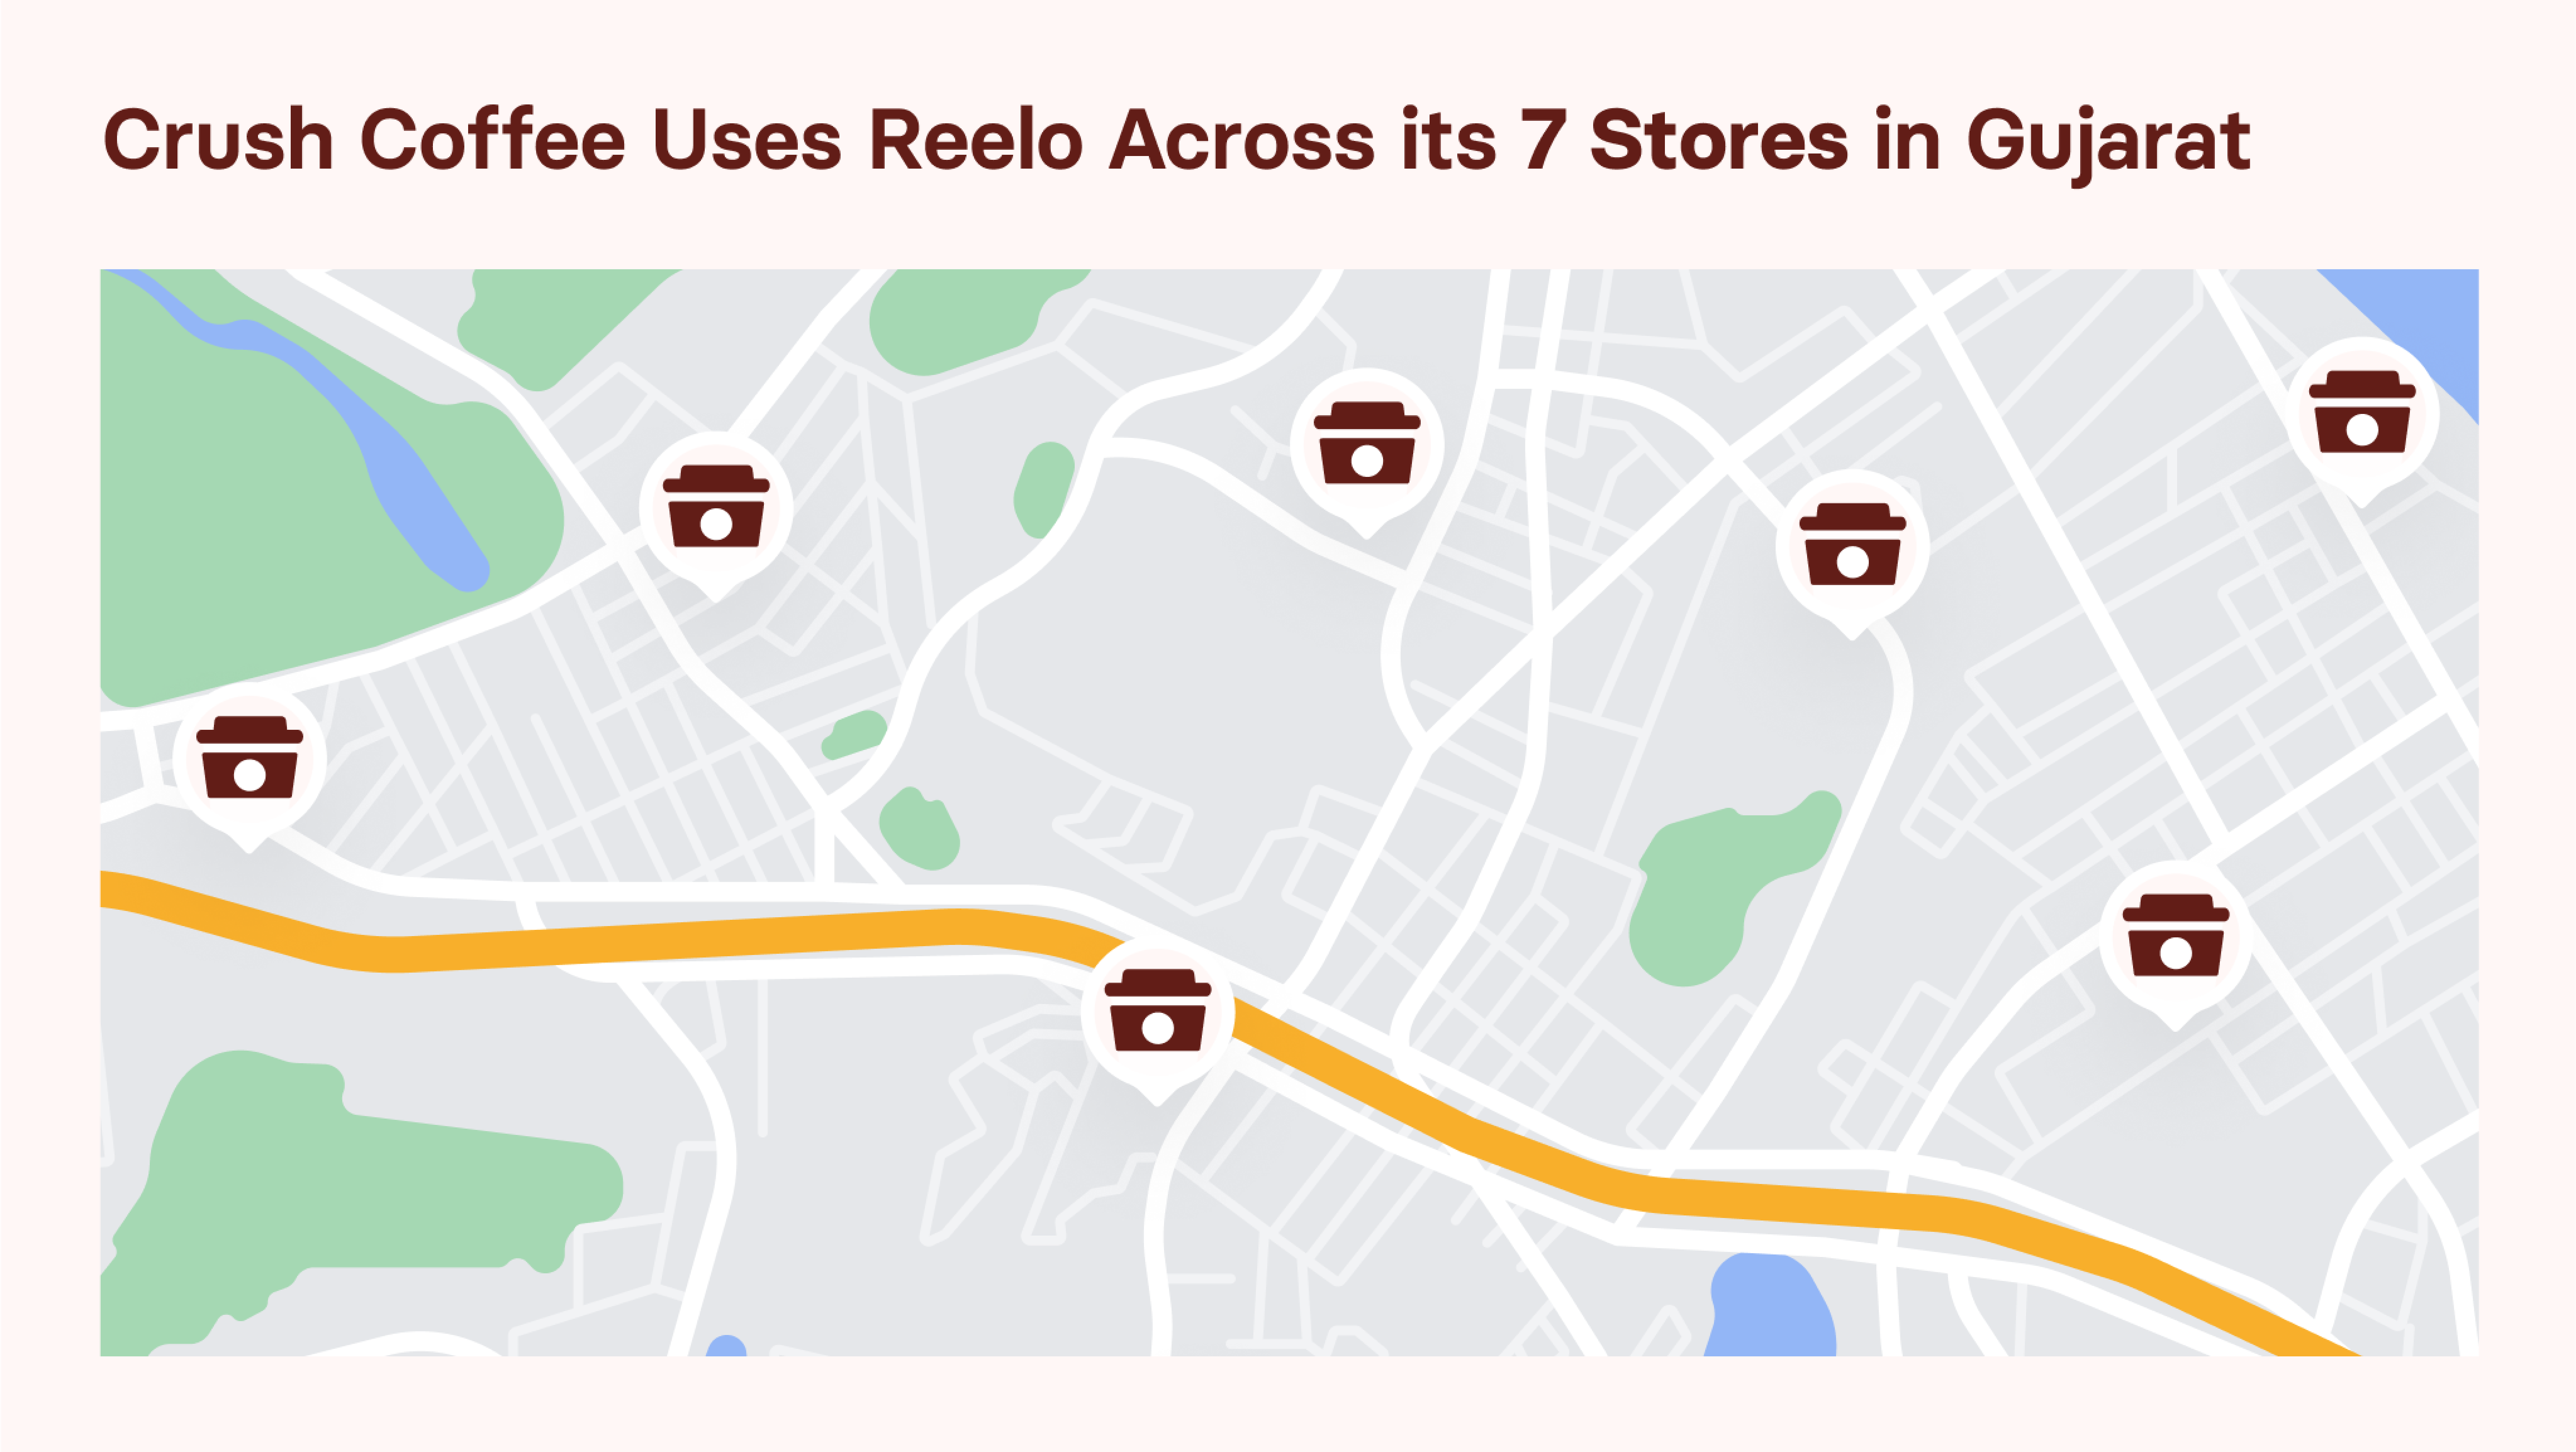 Crush Coffee uses Reelo in 7 stores